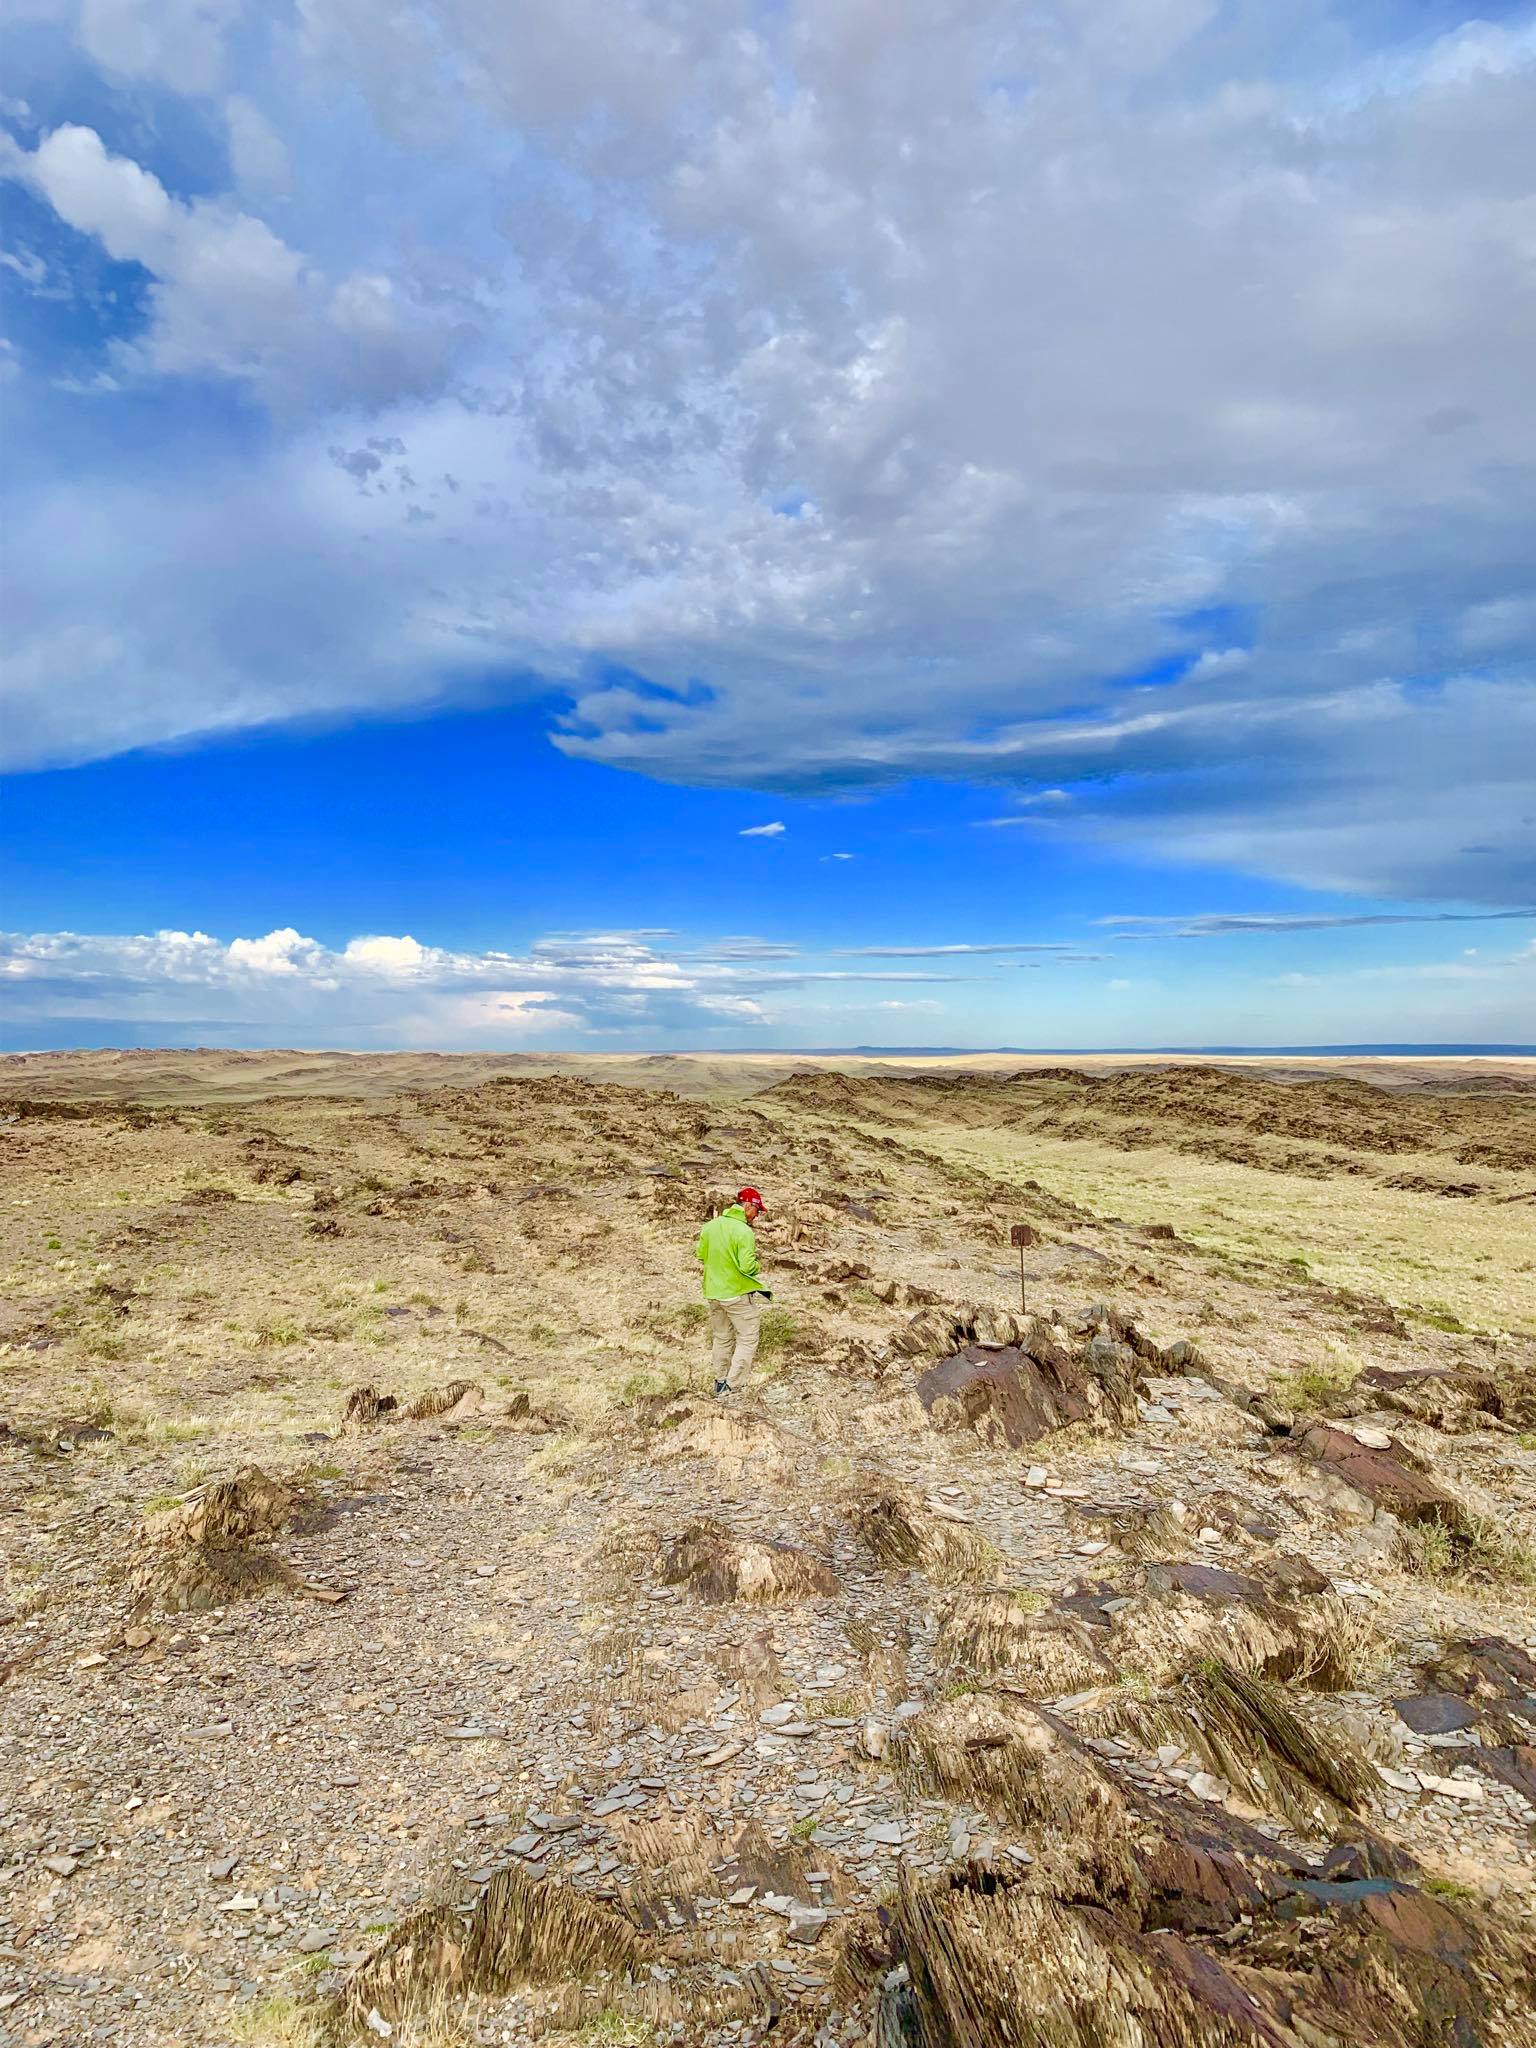 Kach Solo Travels in 2019 One of the hikes during my trip in Gobi desert14.jpg